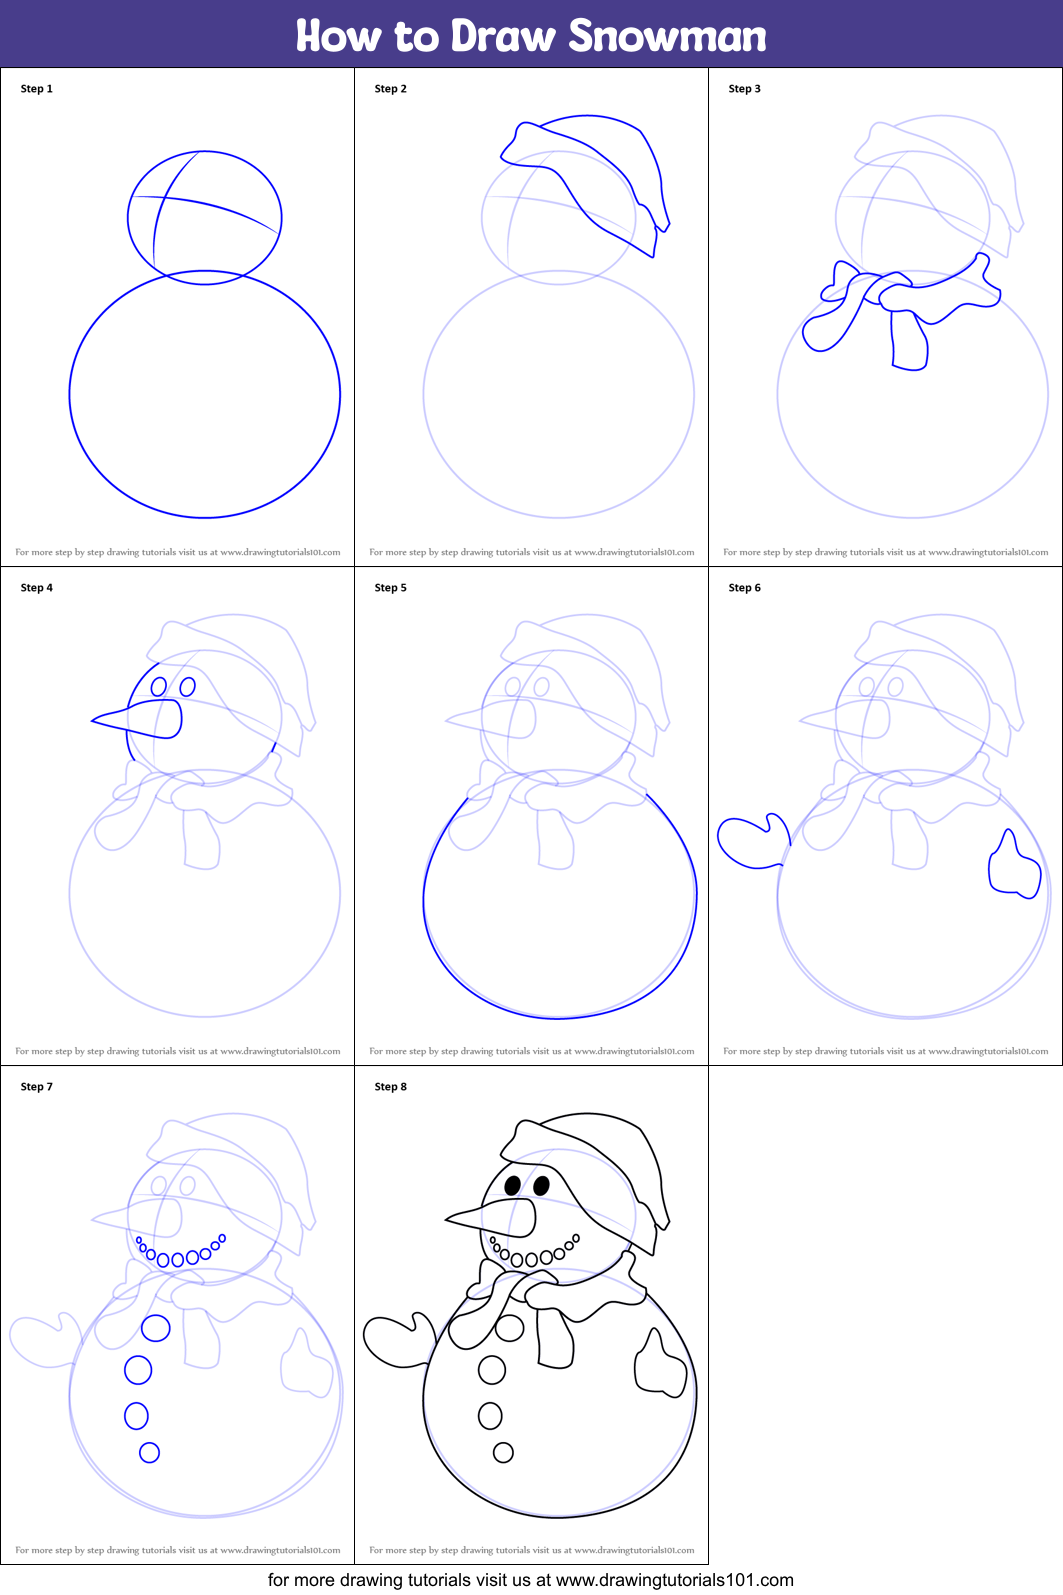 How to Draw Snowman printable step by step drawing sheet